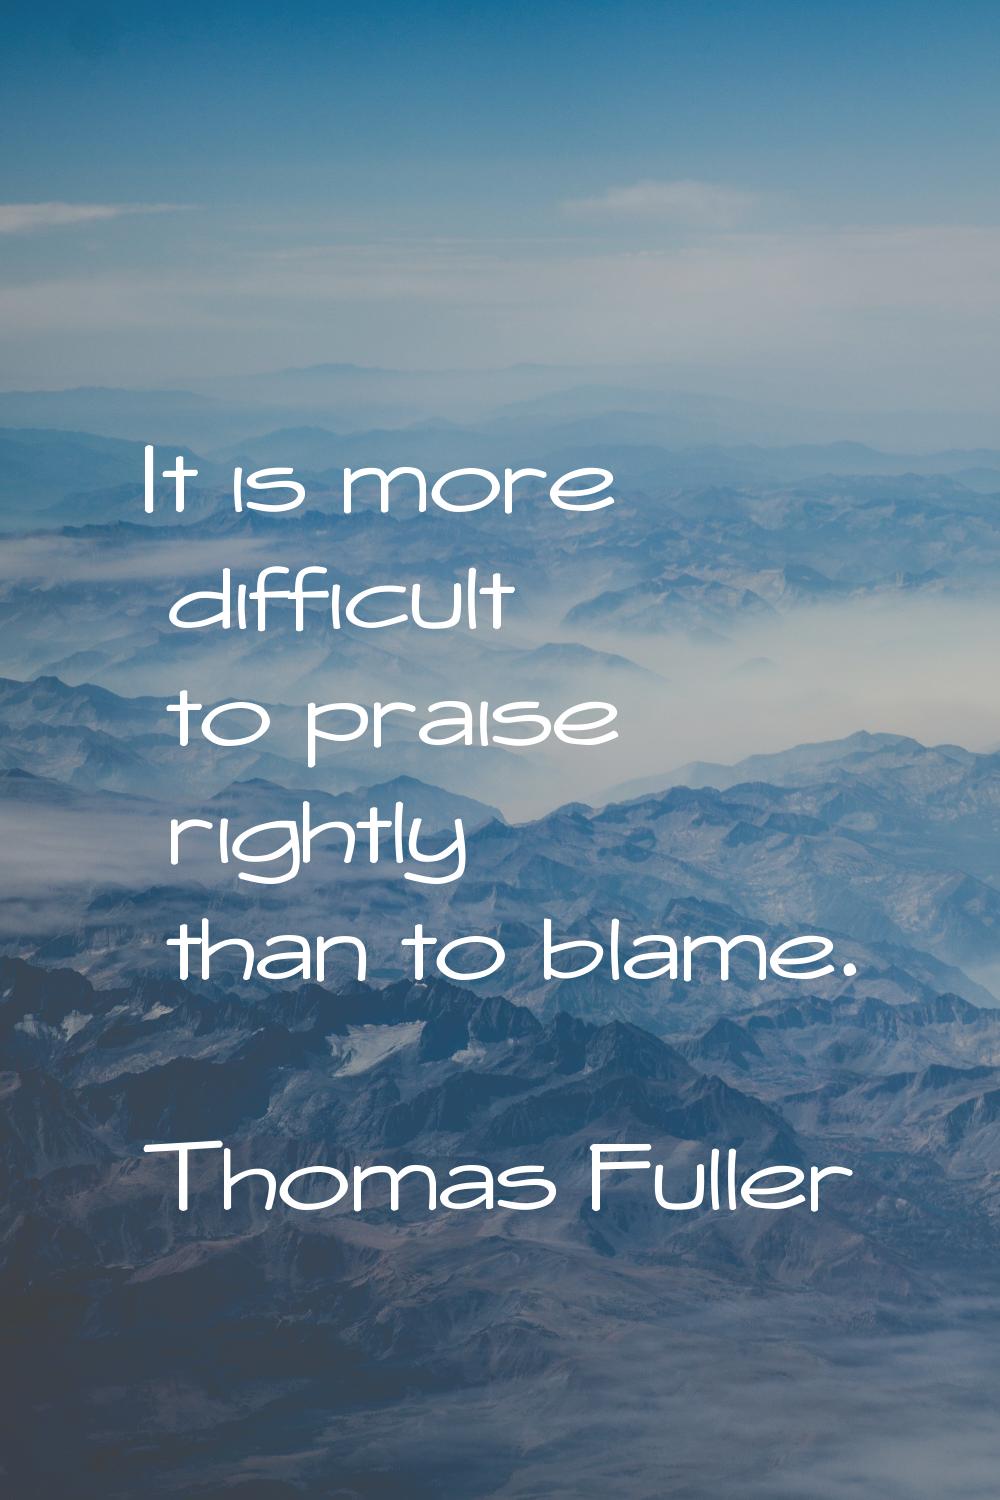 It is more difficult to praise rightly than to blame.